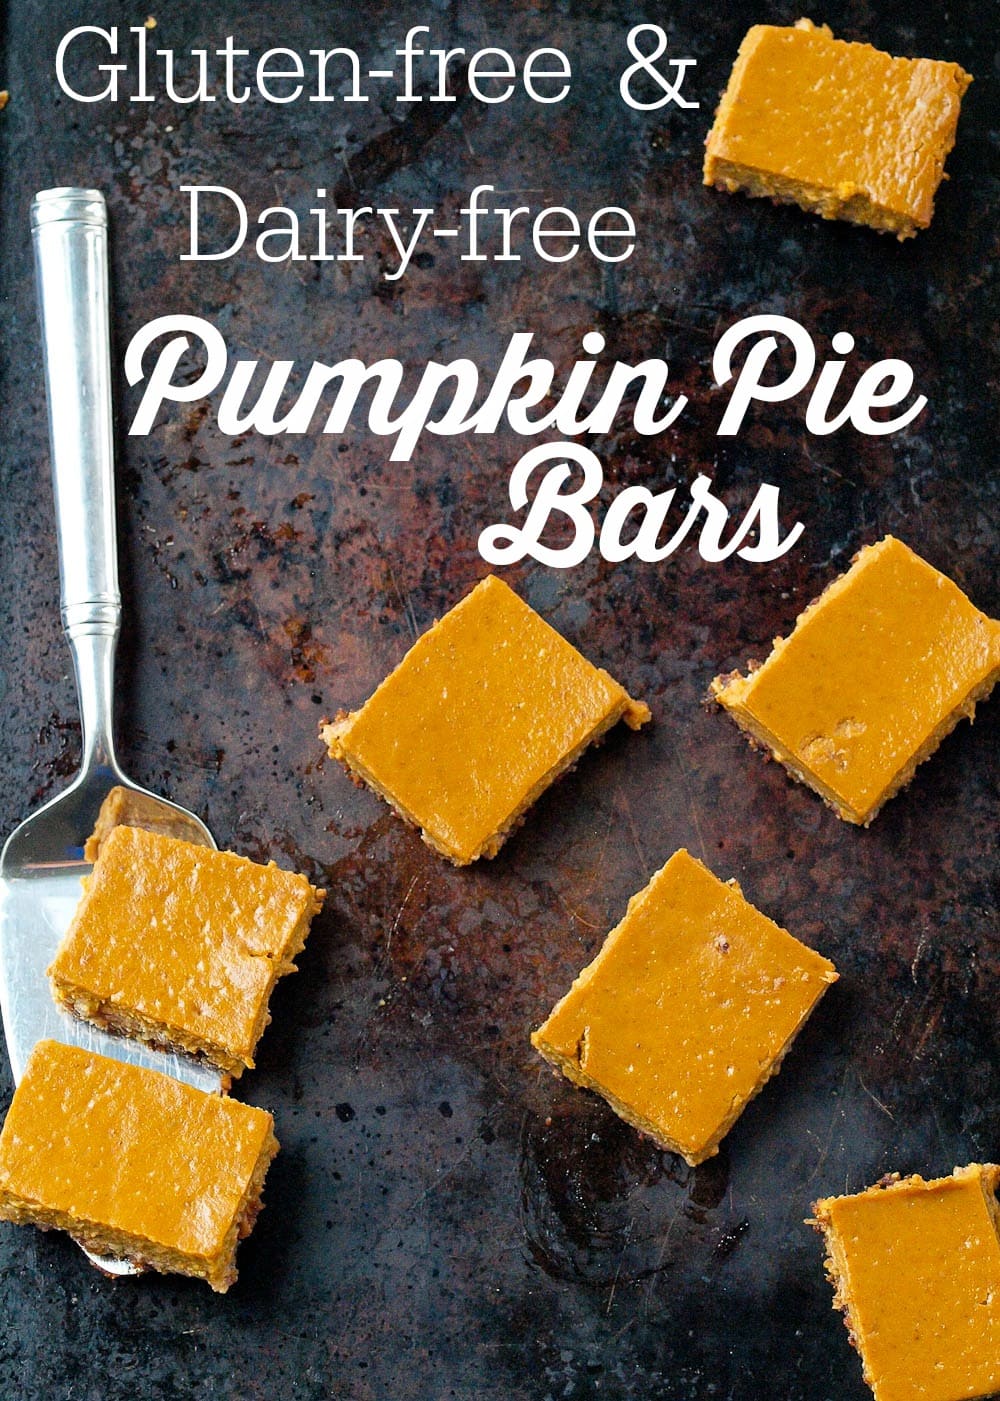 These Pumpkin Pie Bars will be the hit of your Thanksgiving dessert table! The gluten-free nut-based crust is delicious and they are dairy-free, too!